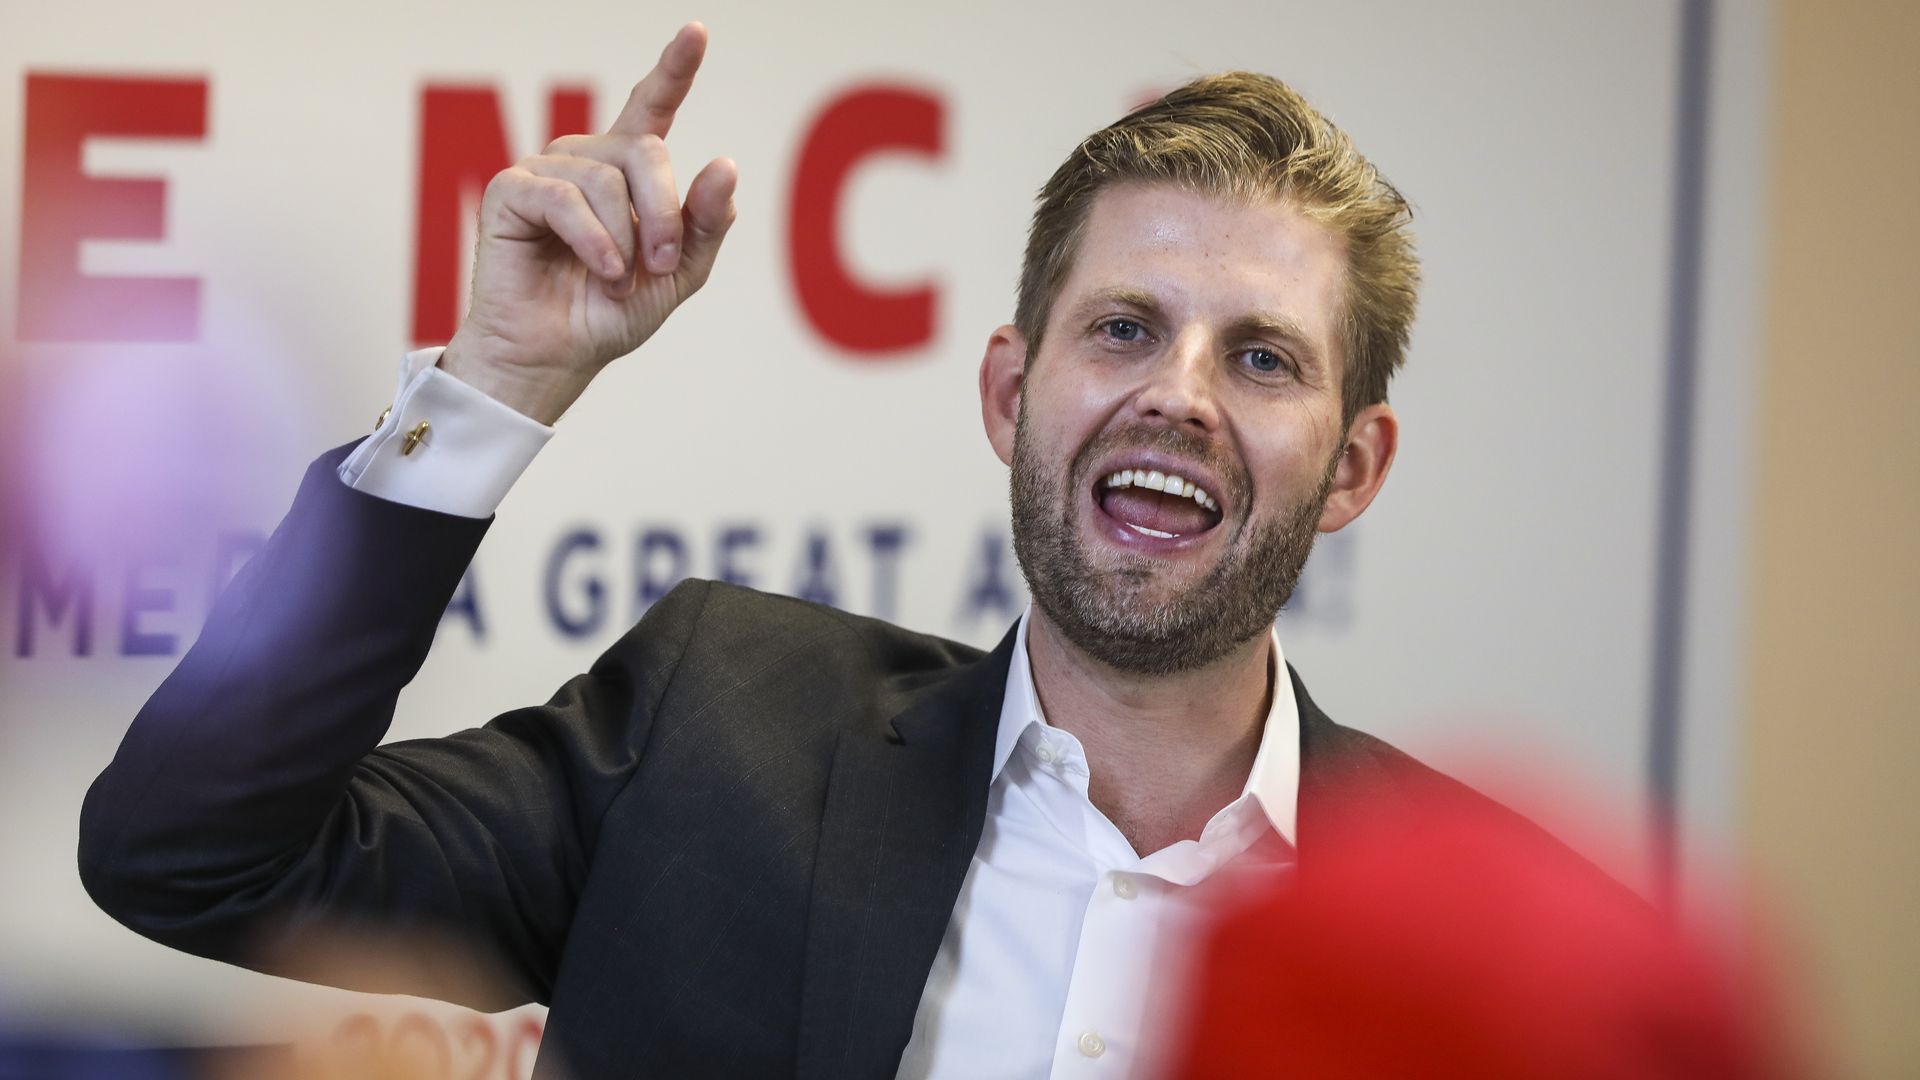 Eric Trump while speaking and gesturing 